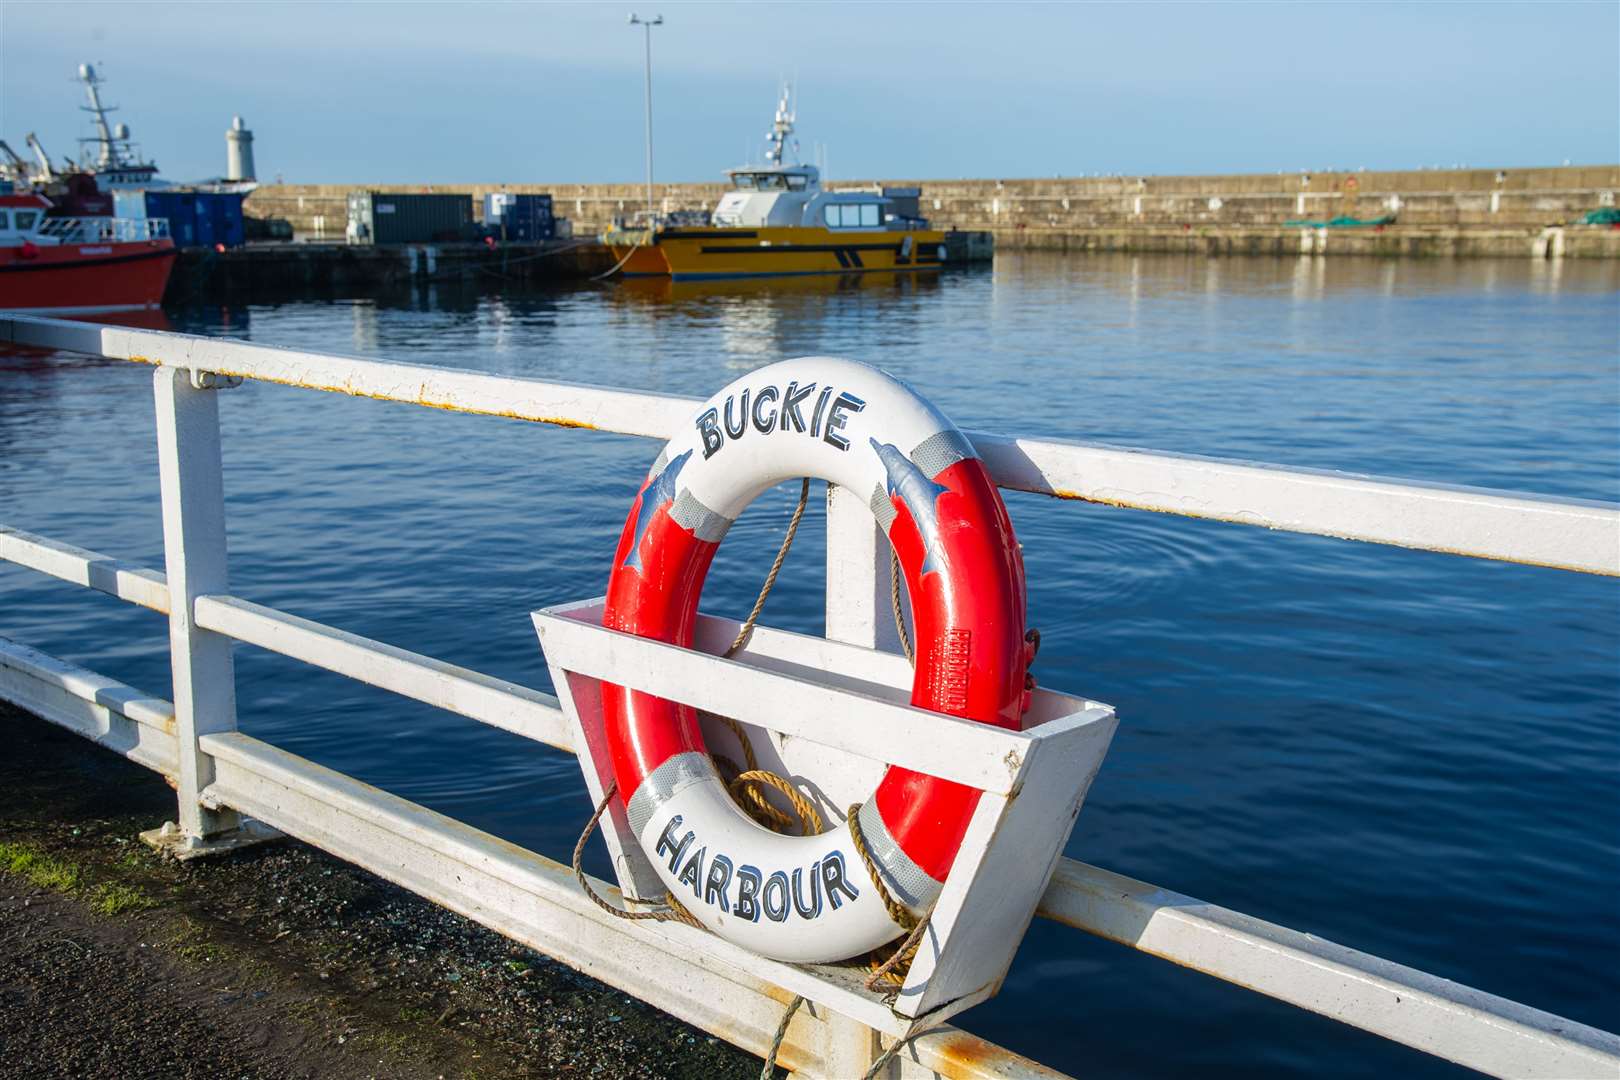 Nearly 350 boxes of fish were landed at Buckie Harbour last week. Picture: Daniel Forsyth